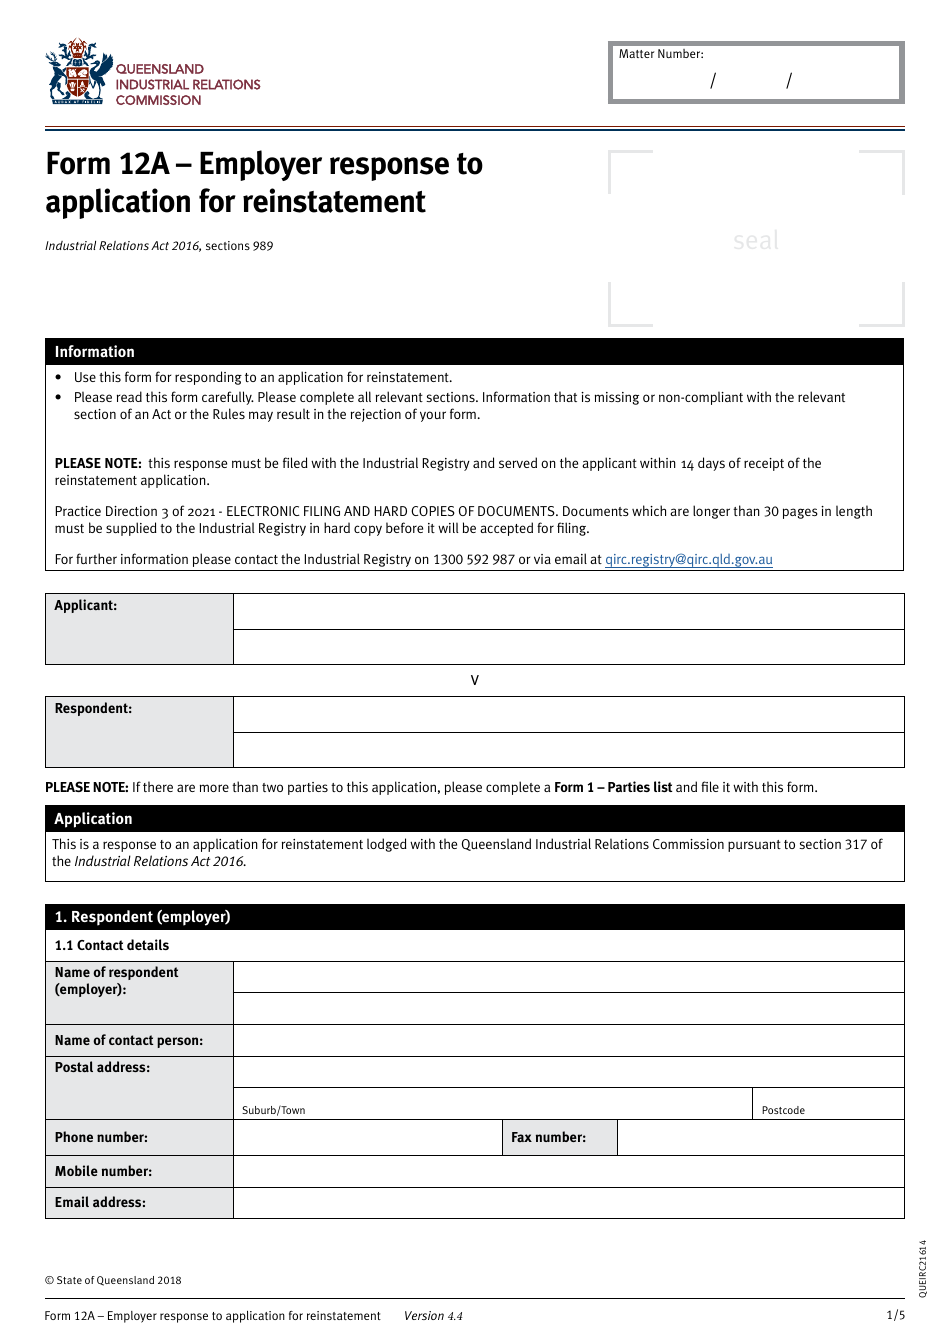 Form 12A Employer Response to Application for Reinstatement - Queensland, Australia, Page 1